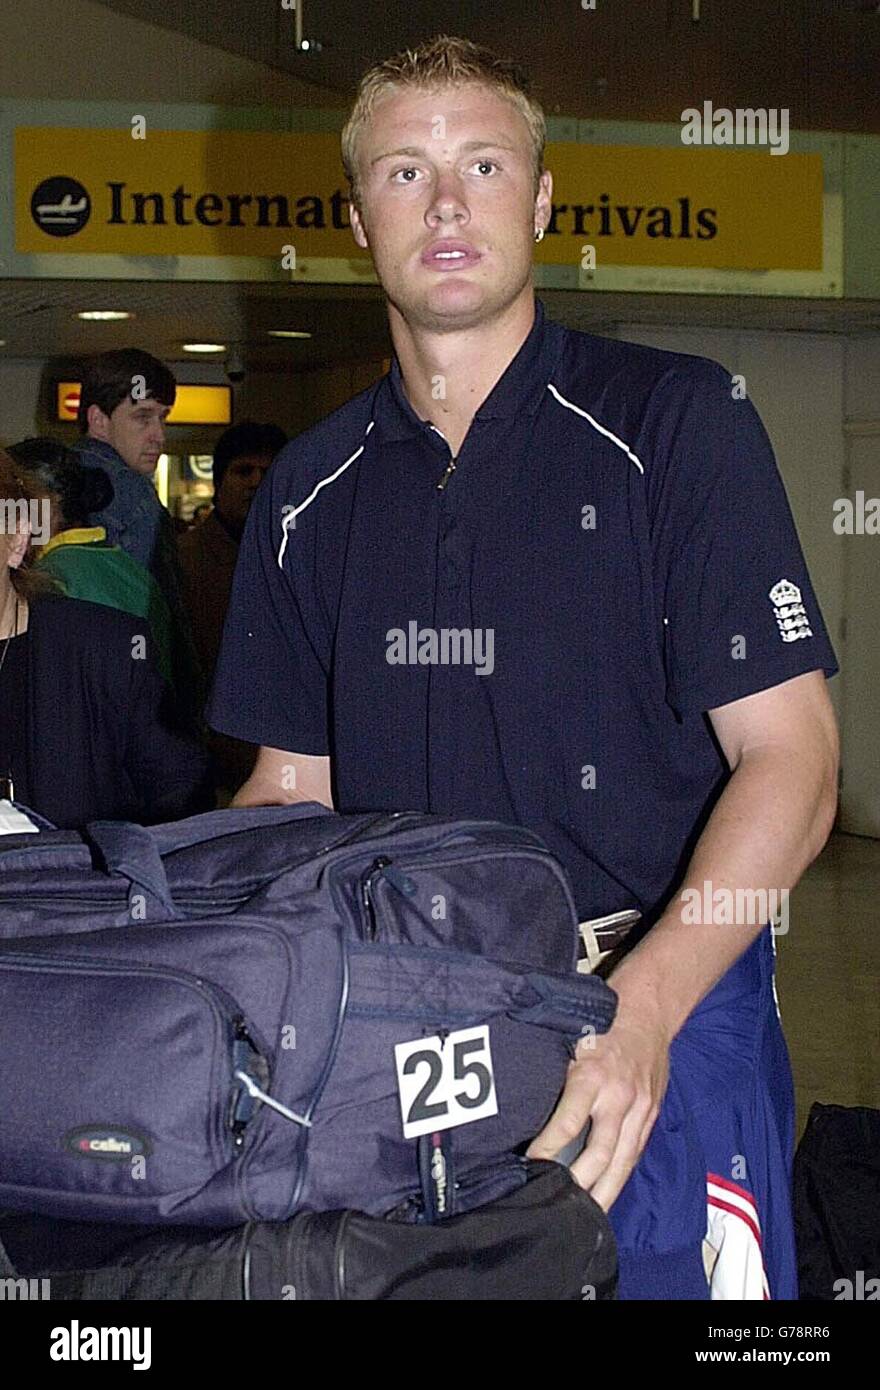 EDITORIAL USE ONLY - NO COMMERCIAL USE: England cricketer Andrew Flintoff arrives at Heathrow Airport, after being knocked out of the ICC World Cup in South Africa. Michael Vaughan has admitted he wants to be the next England one-day captain. * The Yorkshire opener is favourite to succeed Nasser Hussain, who quit the post when England failed to reach the Super Six stage of the World Cup in South Africa. Vaughan revealed his friend and England colleague Marcus Trescothick, the other leading contender for the captain s job, would also relish the opportunity. Stock Photo